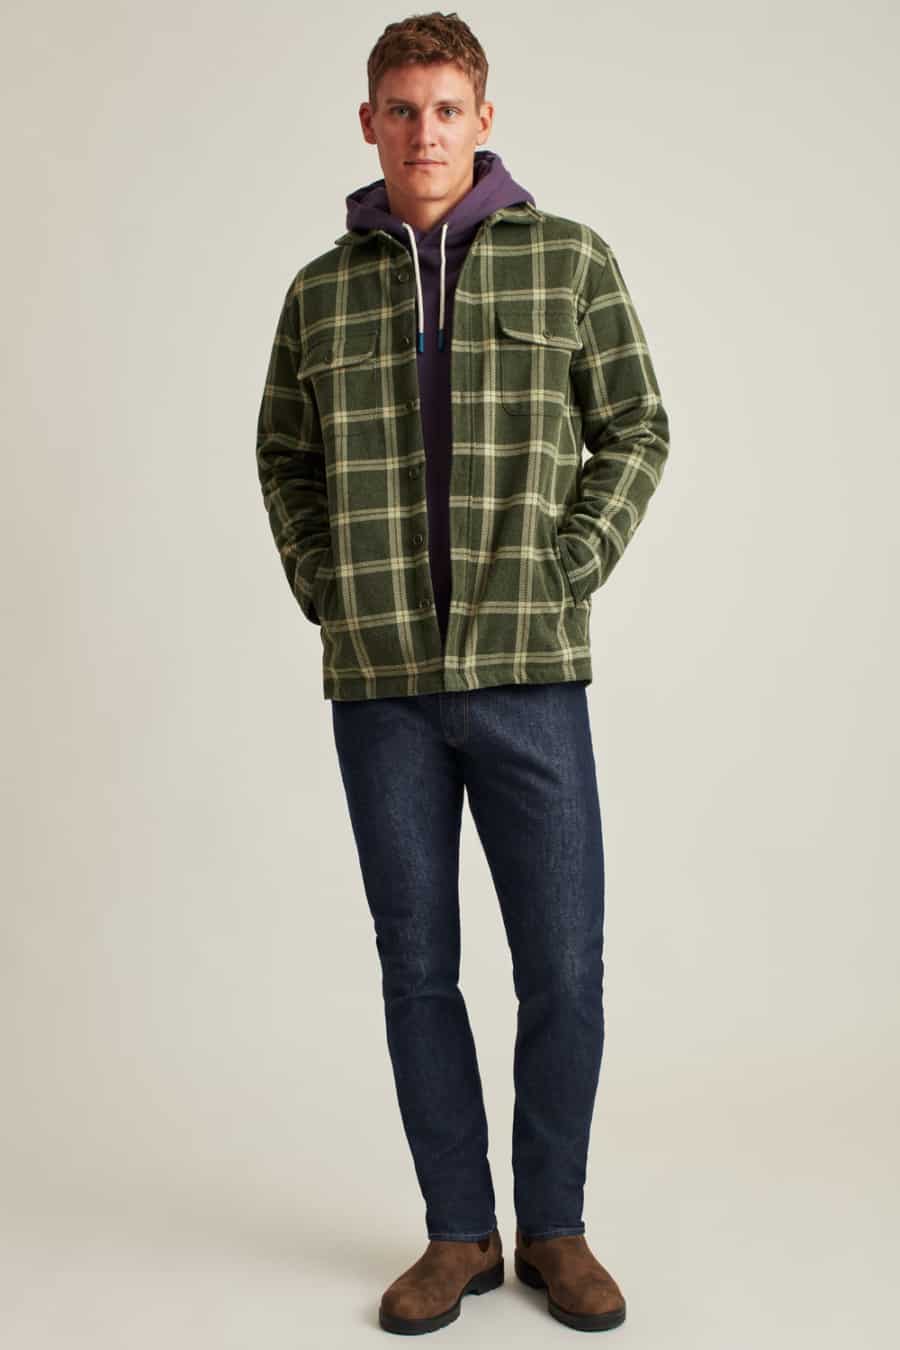 Men's dark jeans, purple hoodie, green and yellow flannel shirt and brown boots outfit